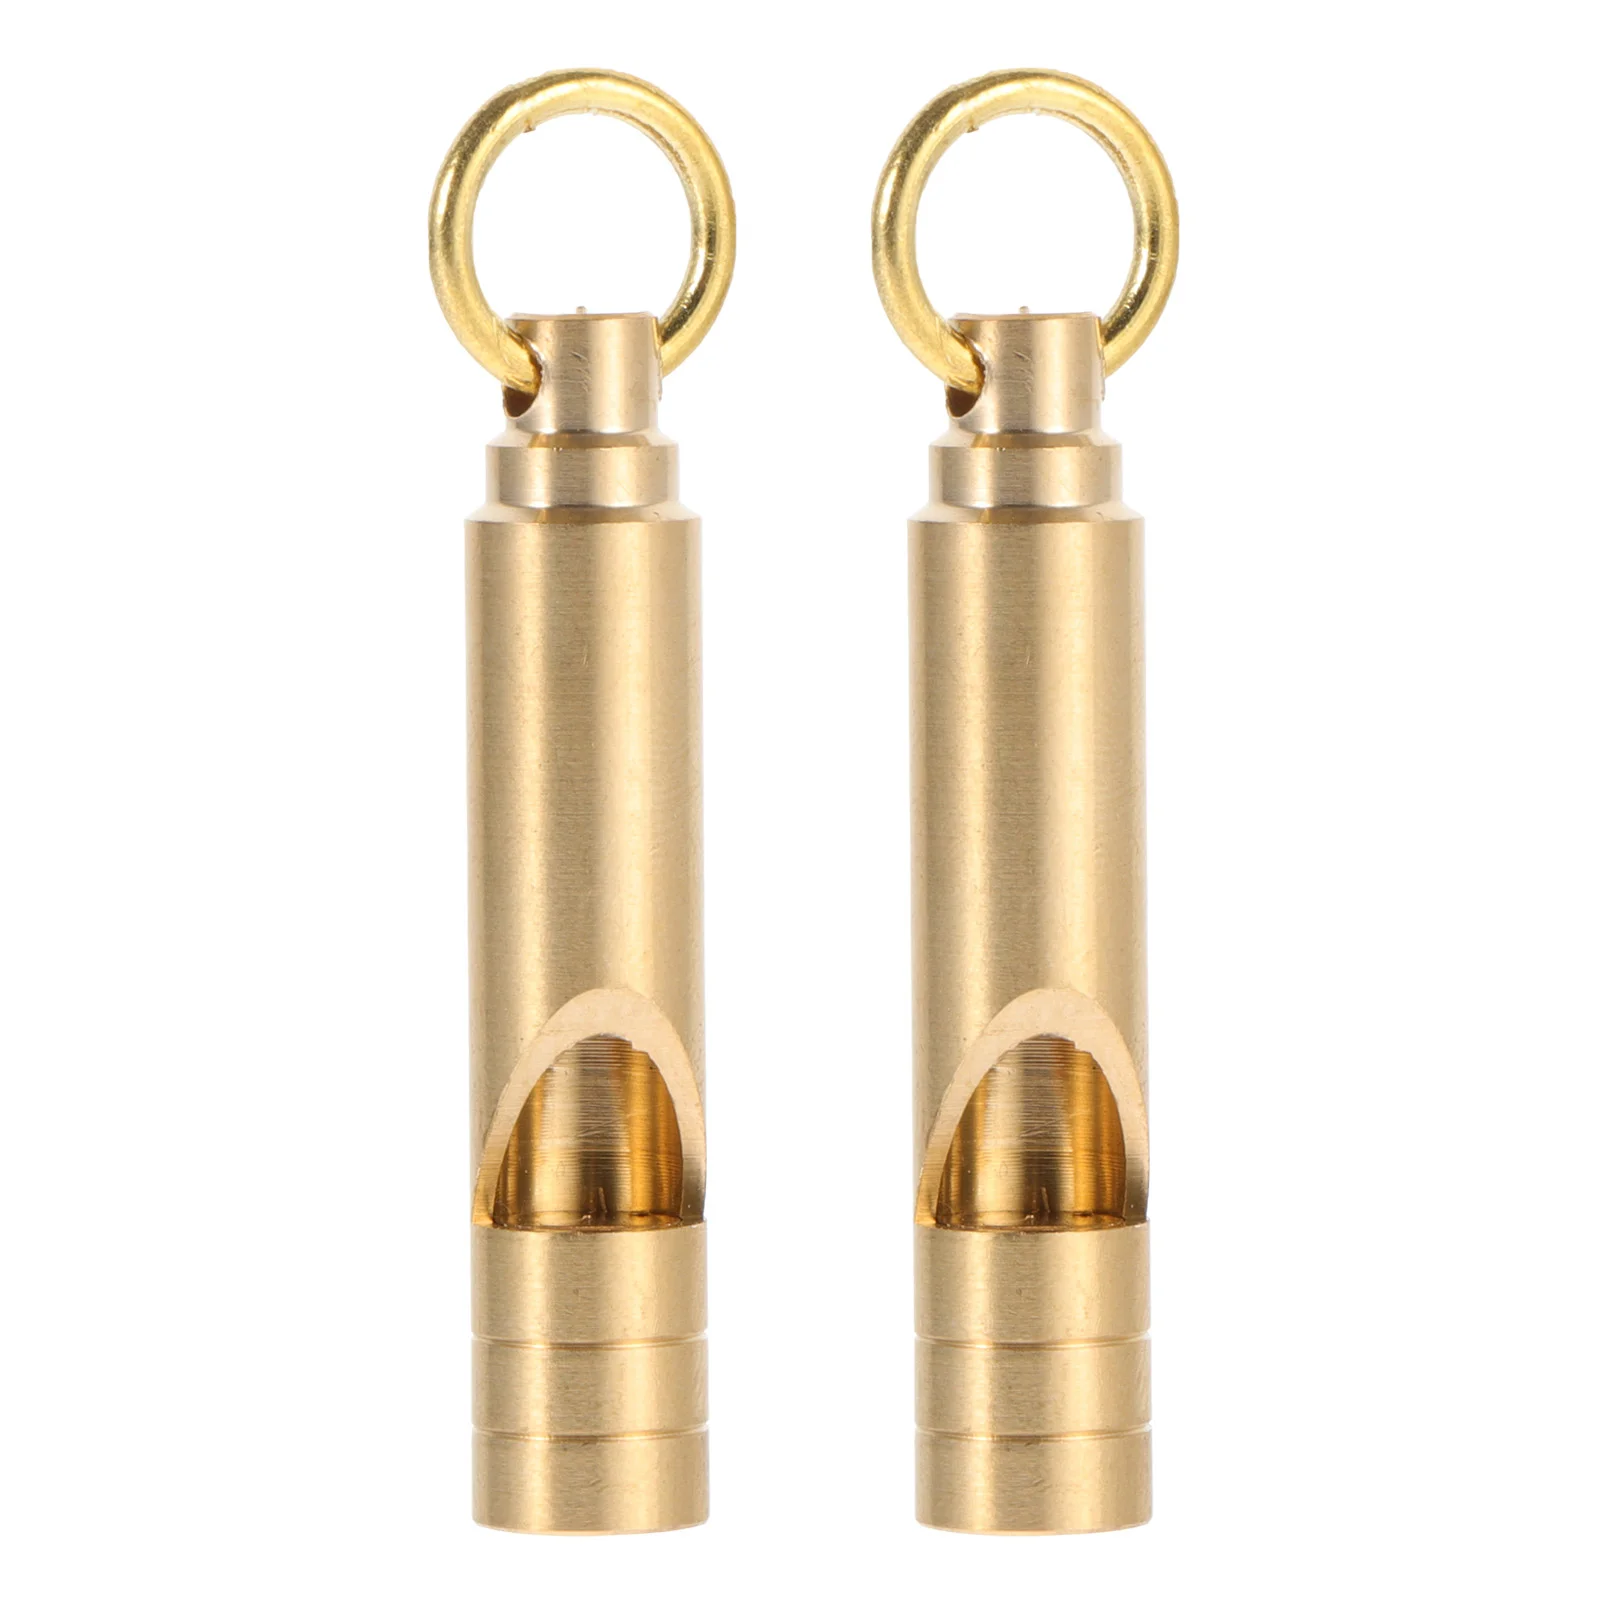 

2 Pcs Competition Whistle Portable Whistle Carabiner Keys Brass Whistle Outdoor Searching Tool Brass Pendant Key Carabiner